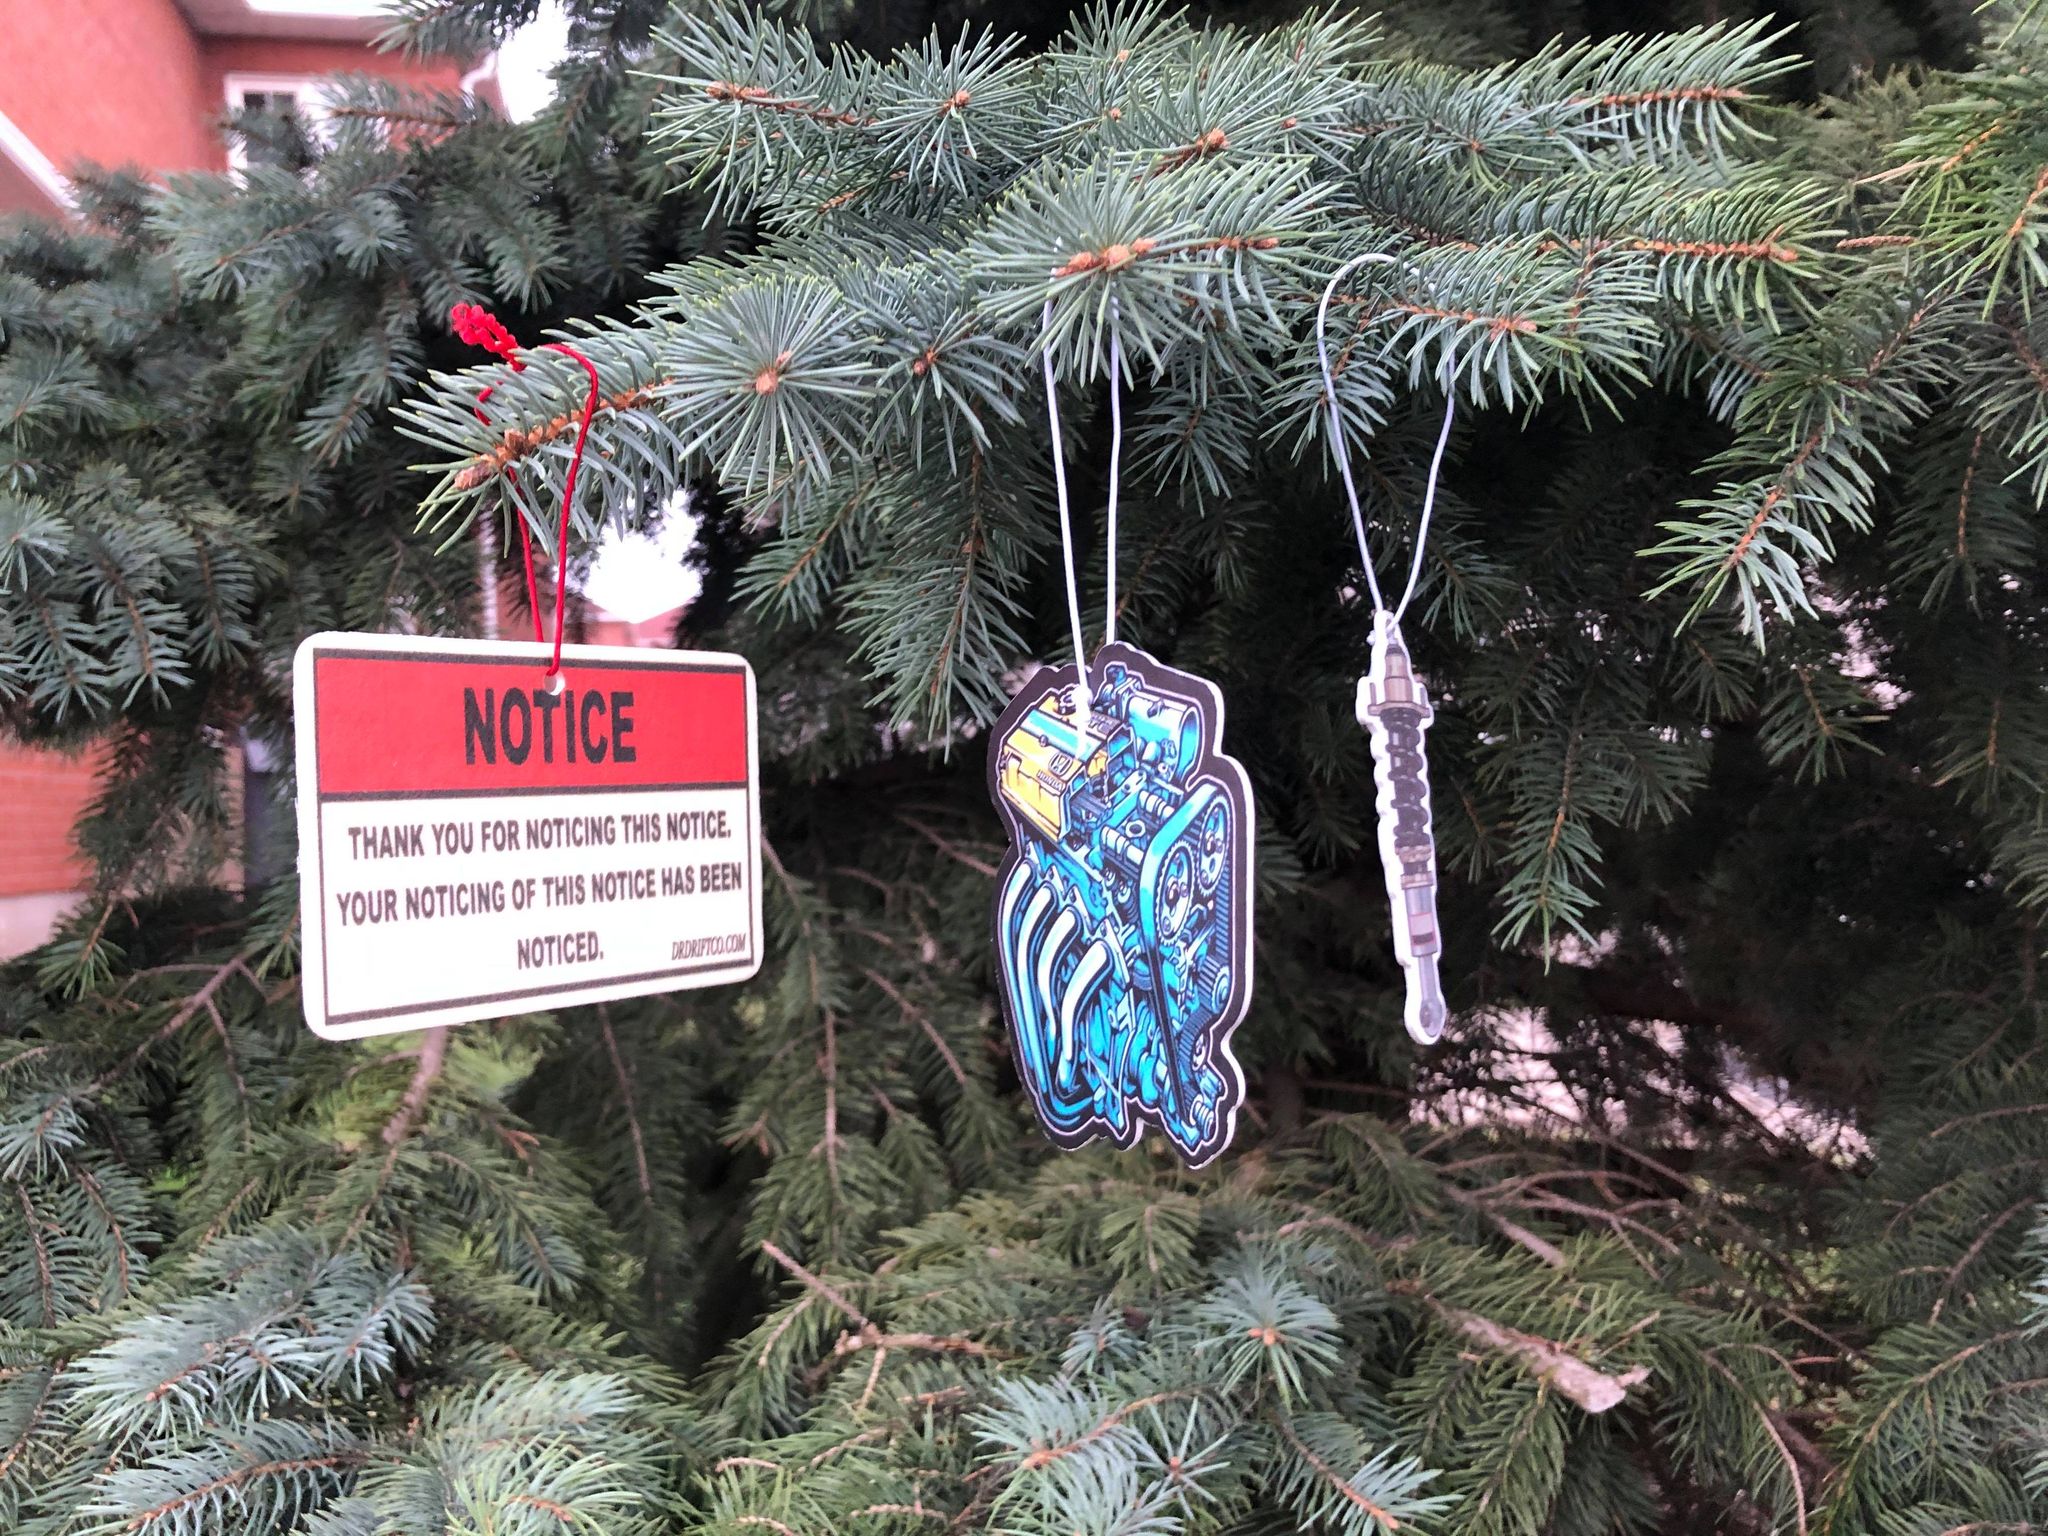 Funny 'NOTICE' Air freshener | RESTOCKED - Mix and Match your air fresheners!